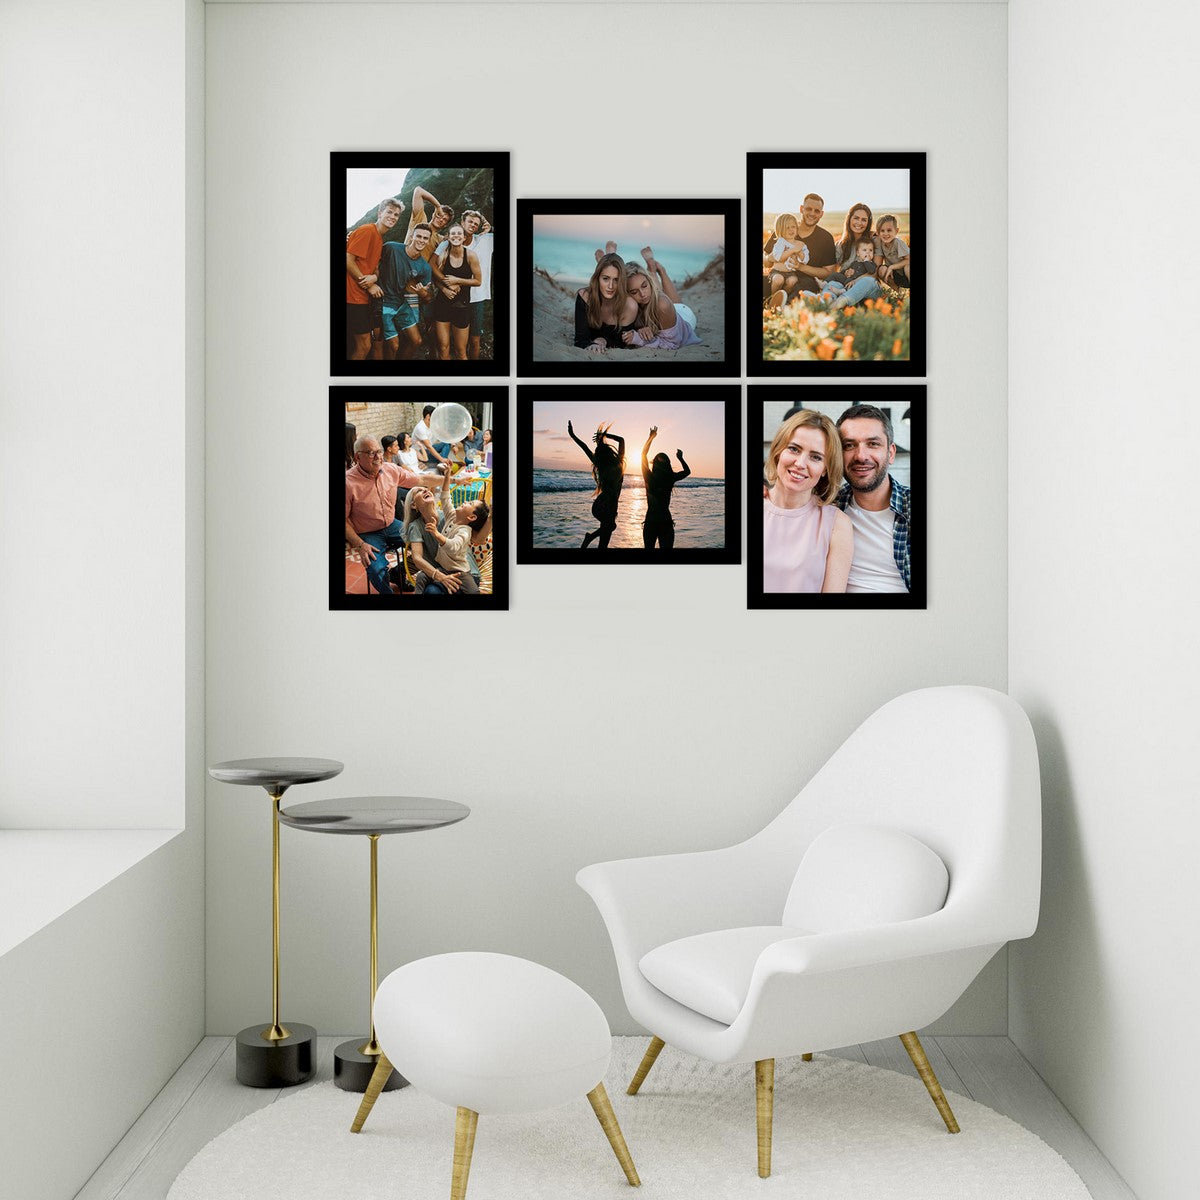 Memory Wall Collage Photo Frame - Set of 6 Photo Frames for 6 Photos of 8"x10" 2